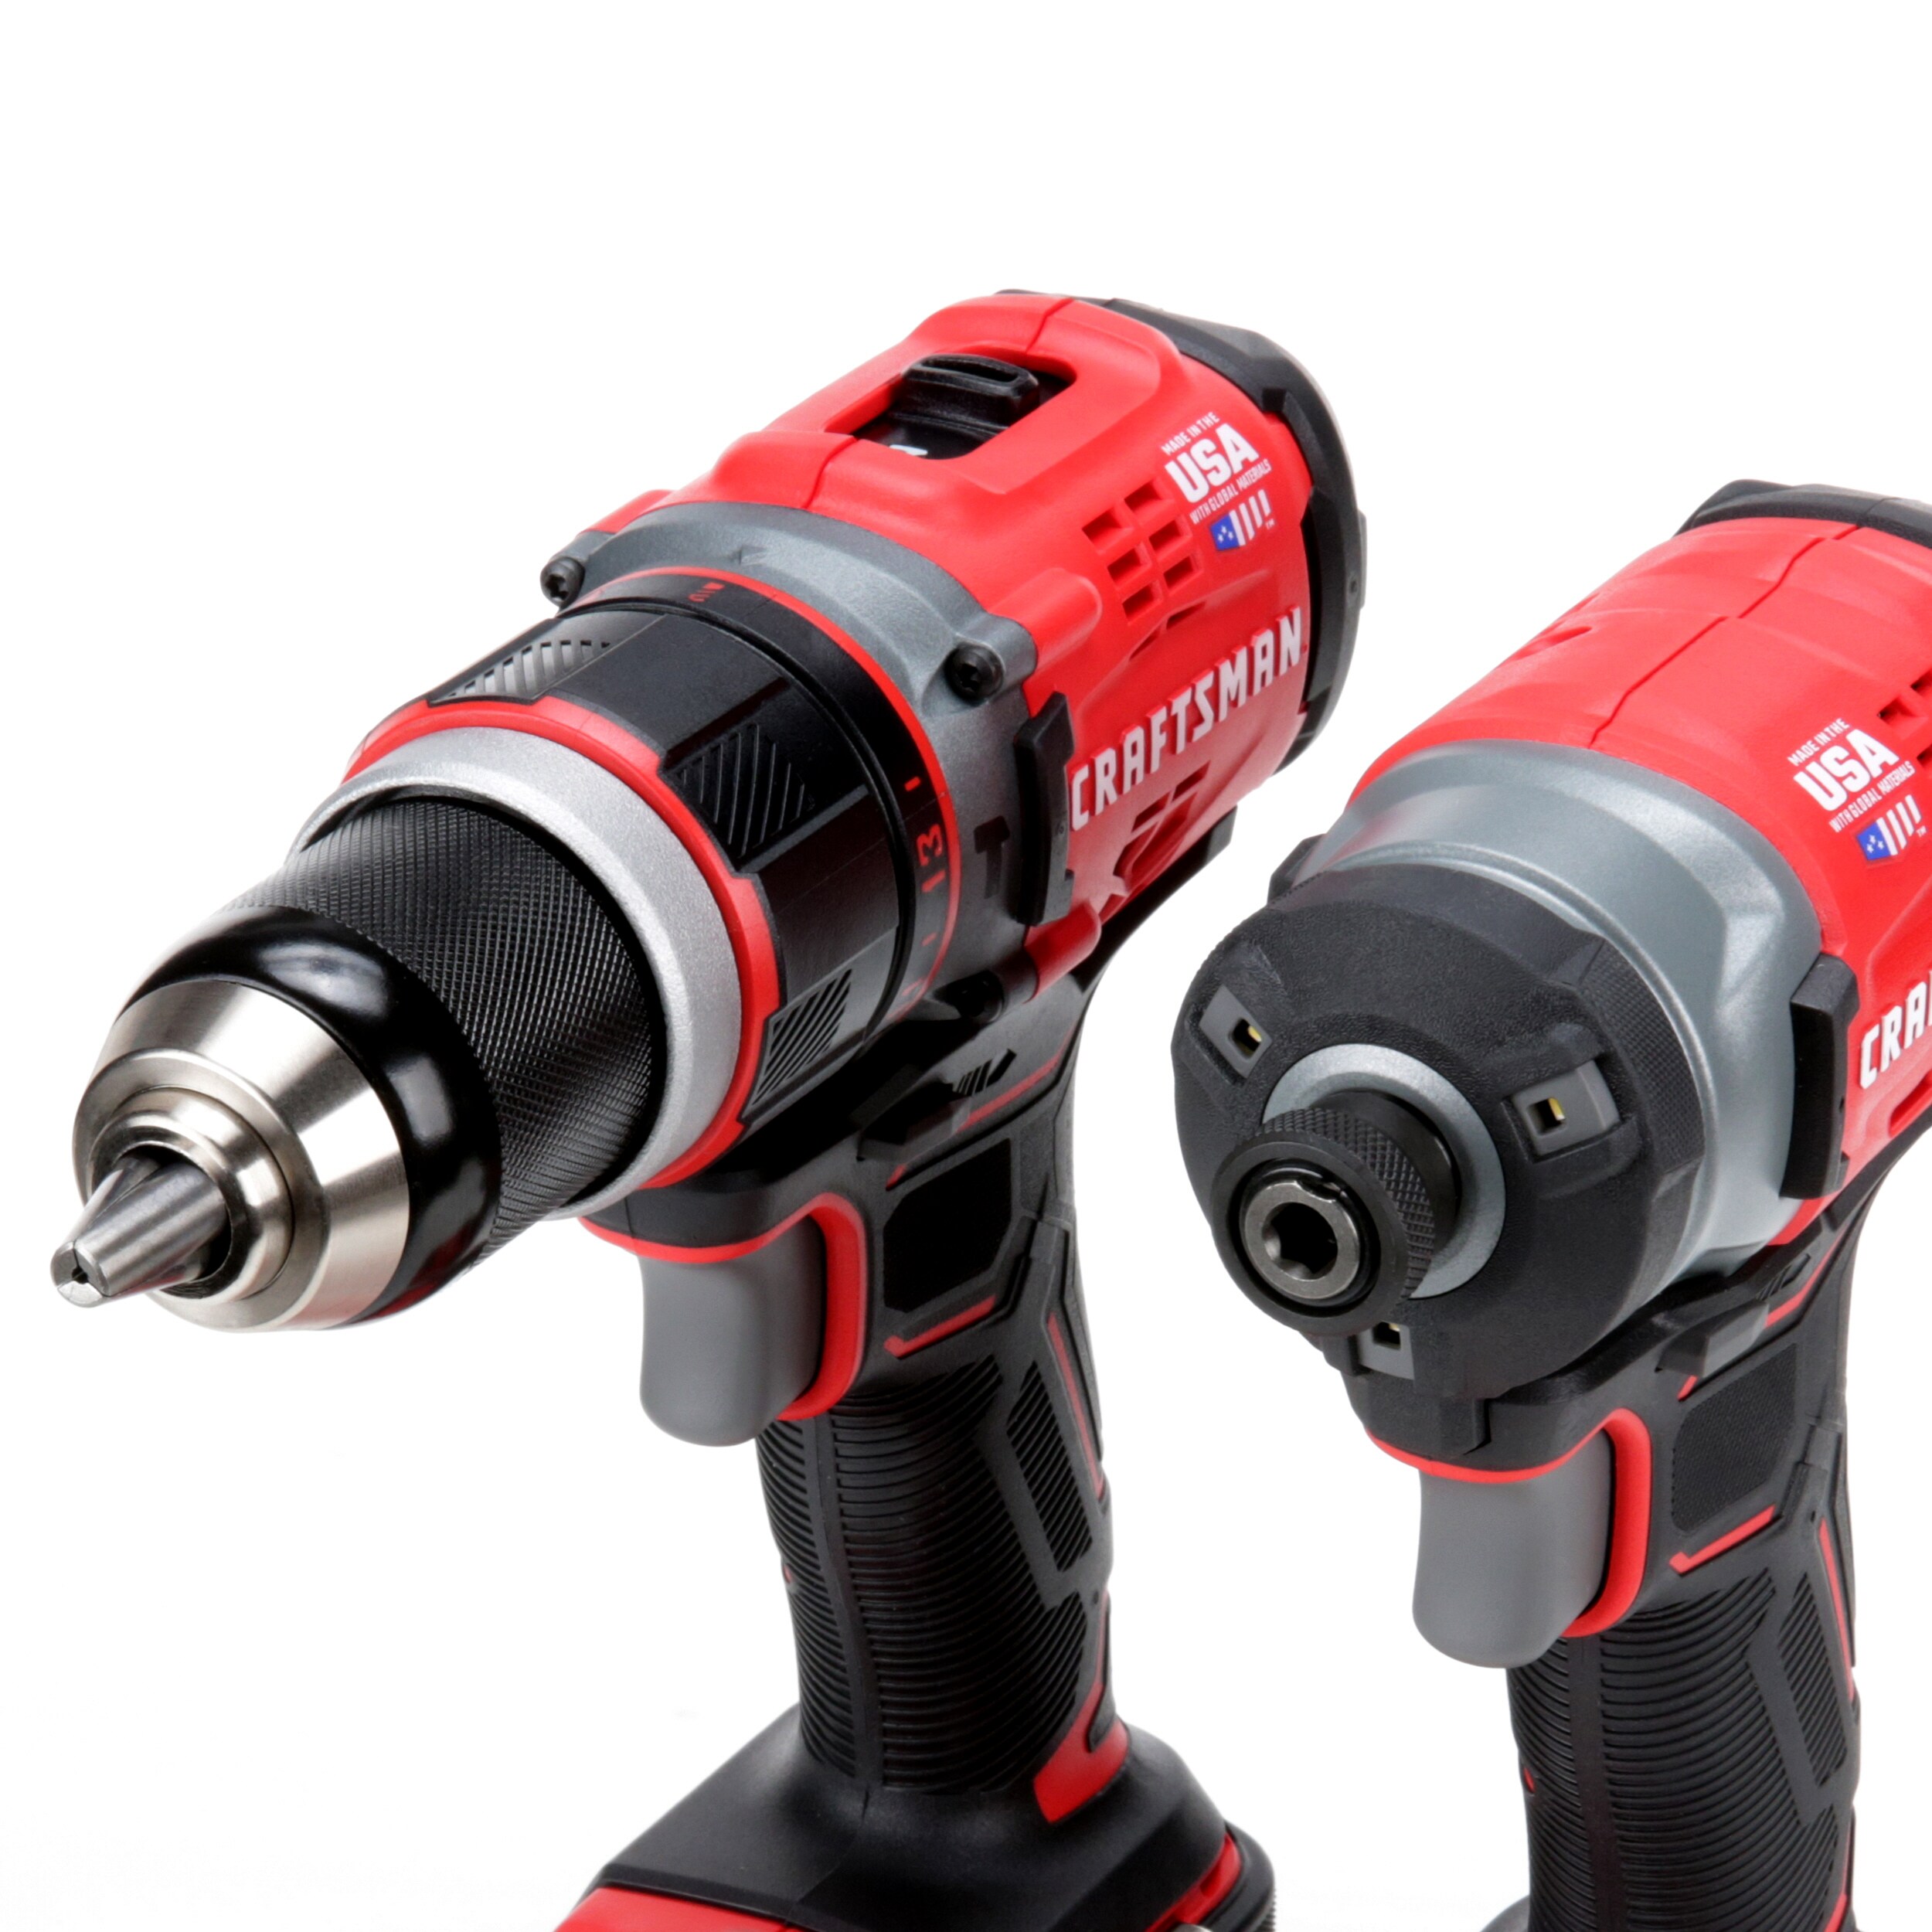 21417 Details about    Craftsman 20v MAX Cordless Drill and Impact Driver Combo Kit 